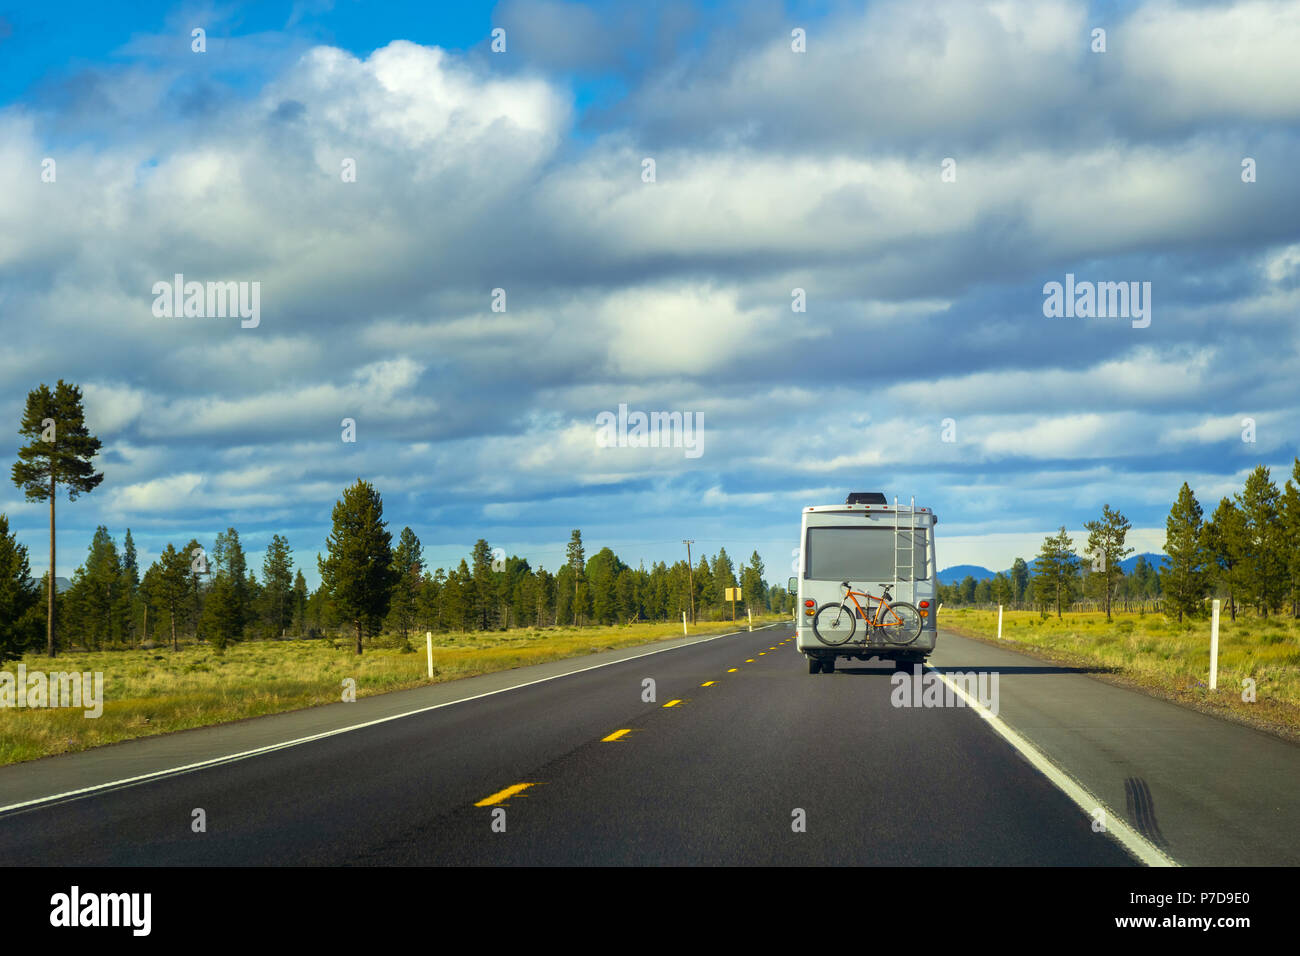 Recreational vehicle with bike hanging on the rear driving through the countryside. Travel and wanderlust concept image with copy space. Stock Photo